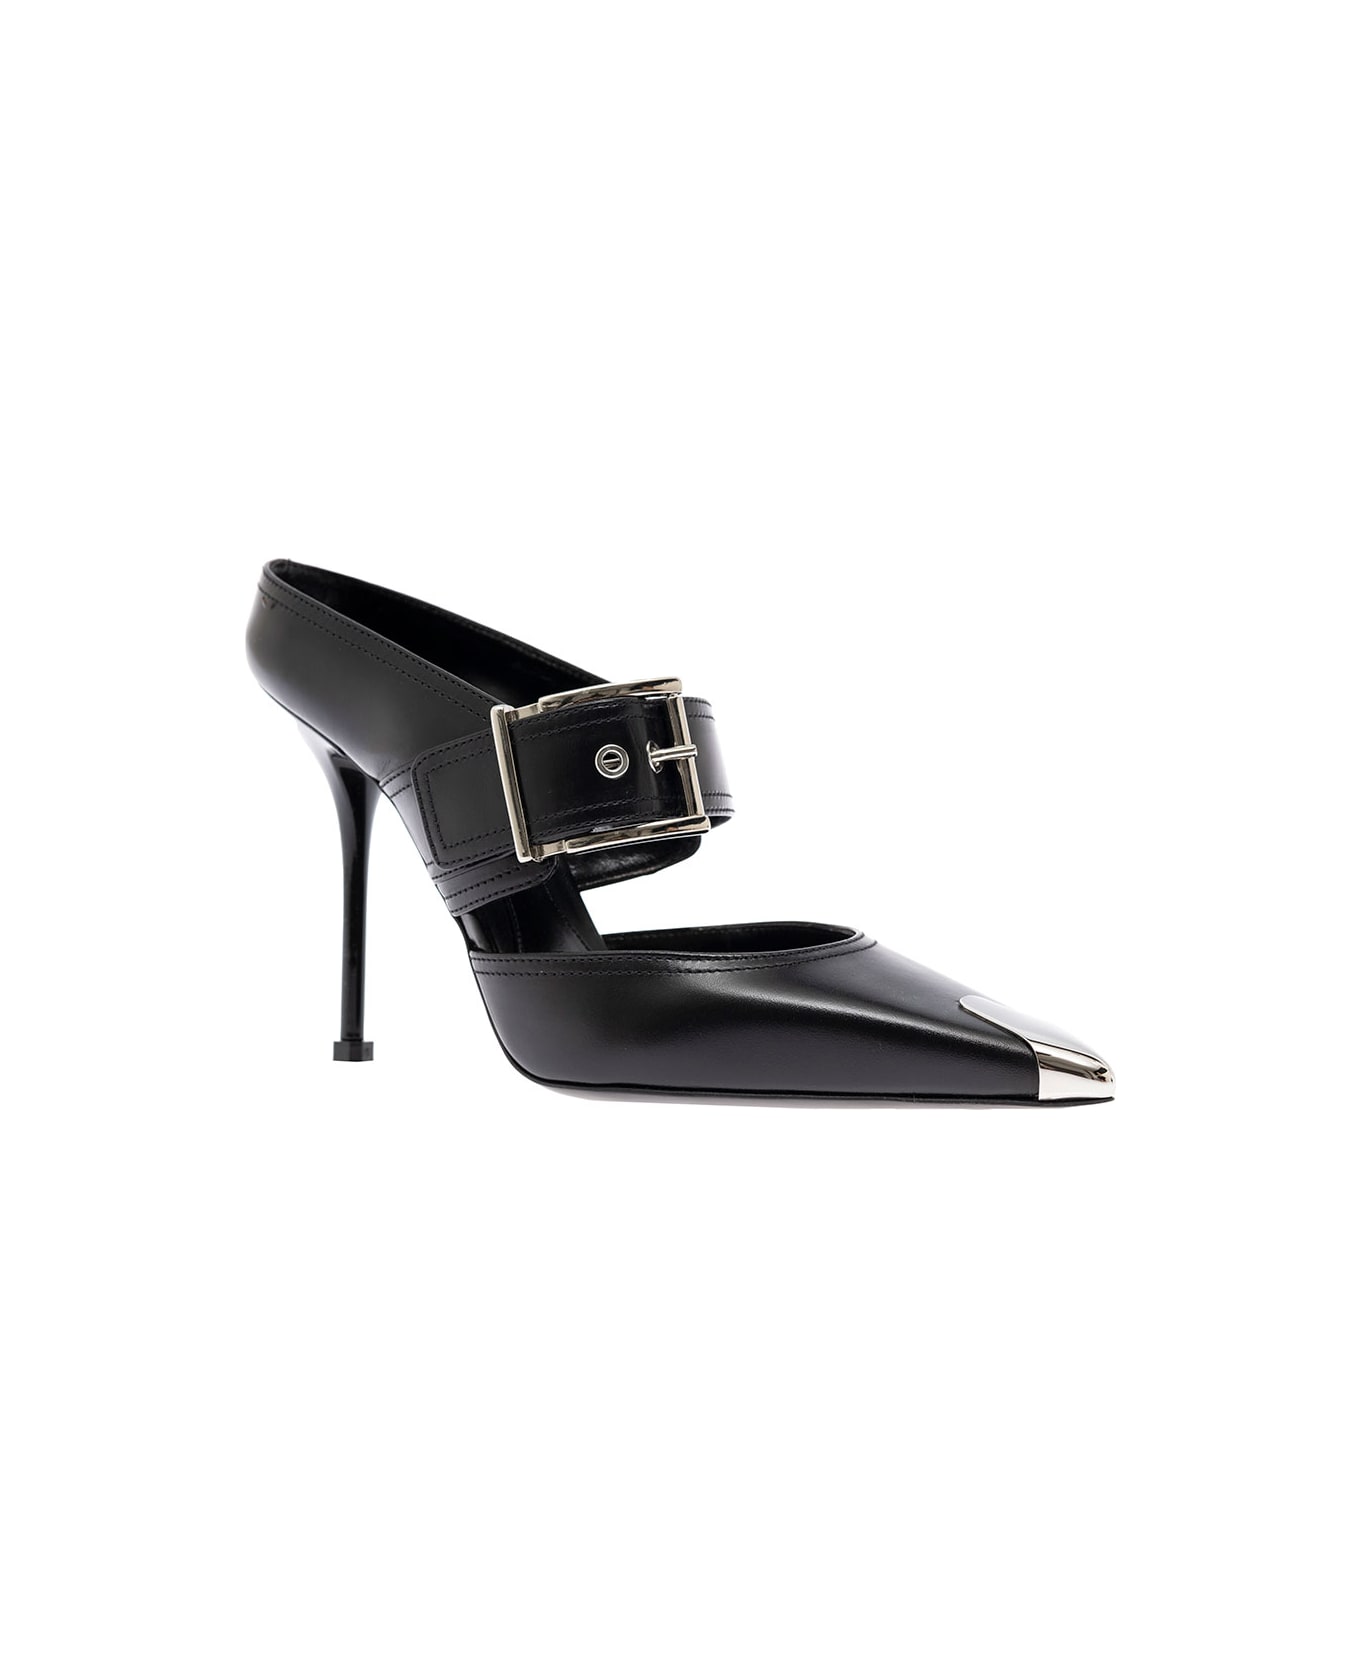 Alexander McQueen Woman's Black Patent Leather Mules With Metal Toe And Buckle - Black